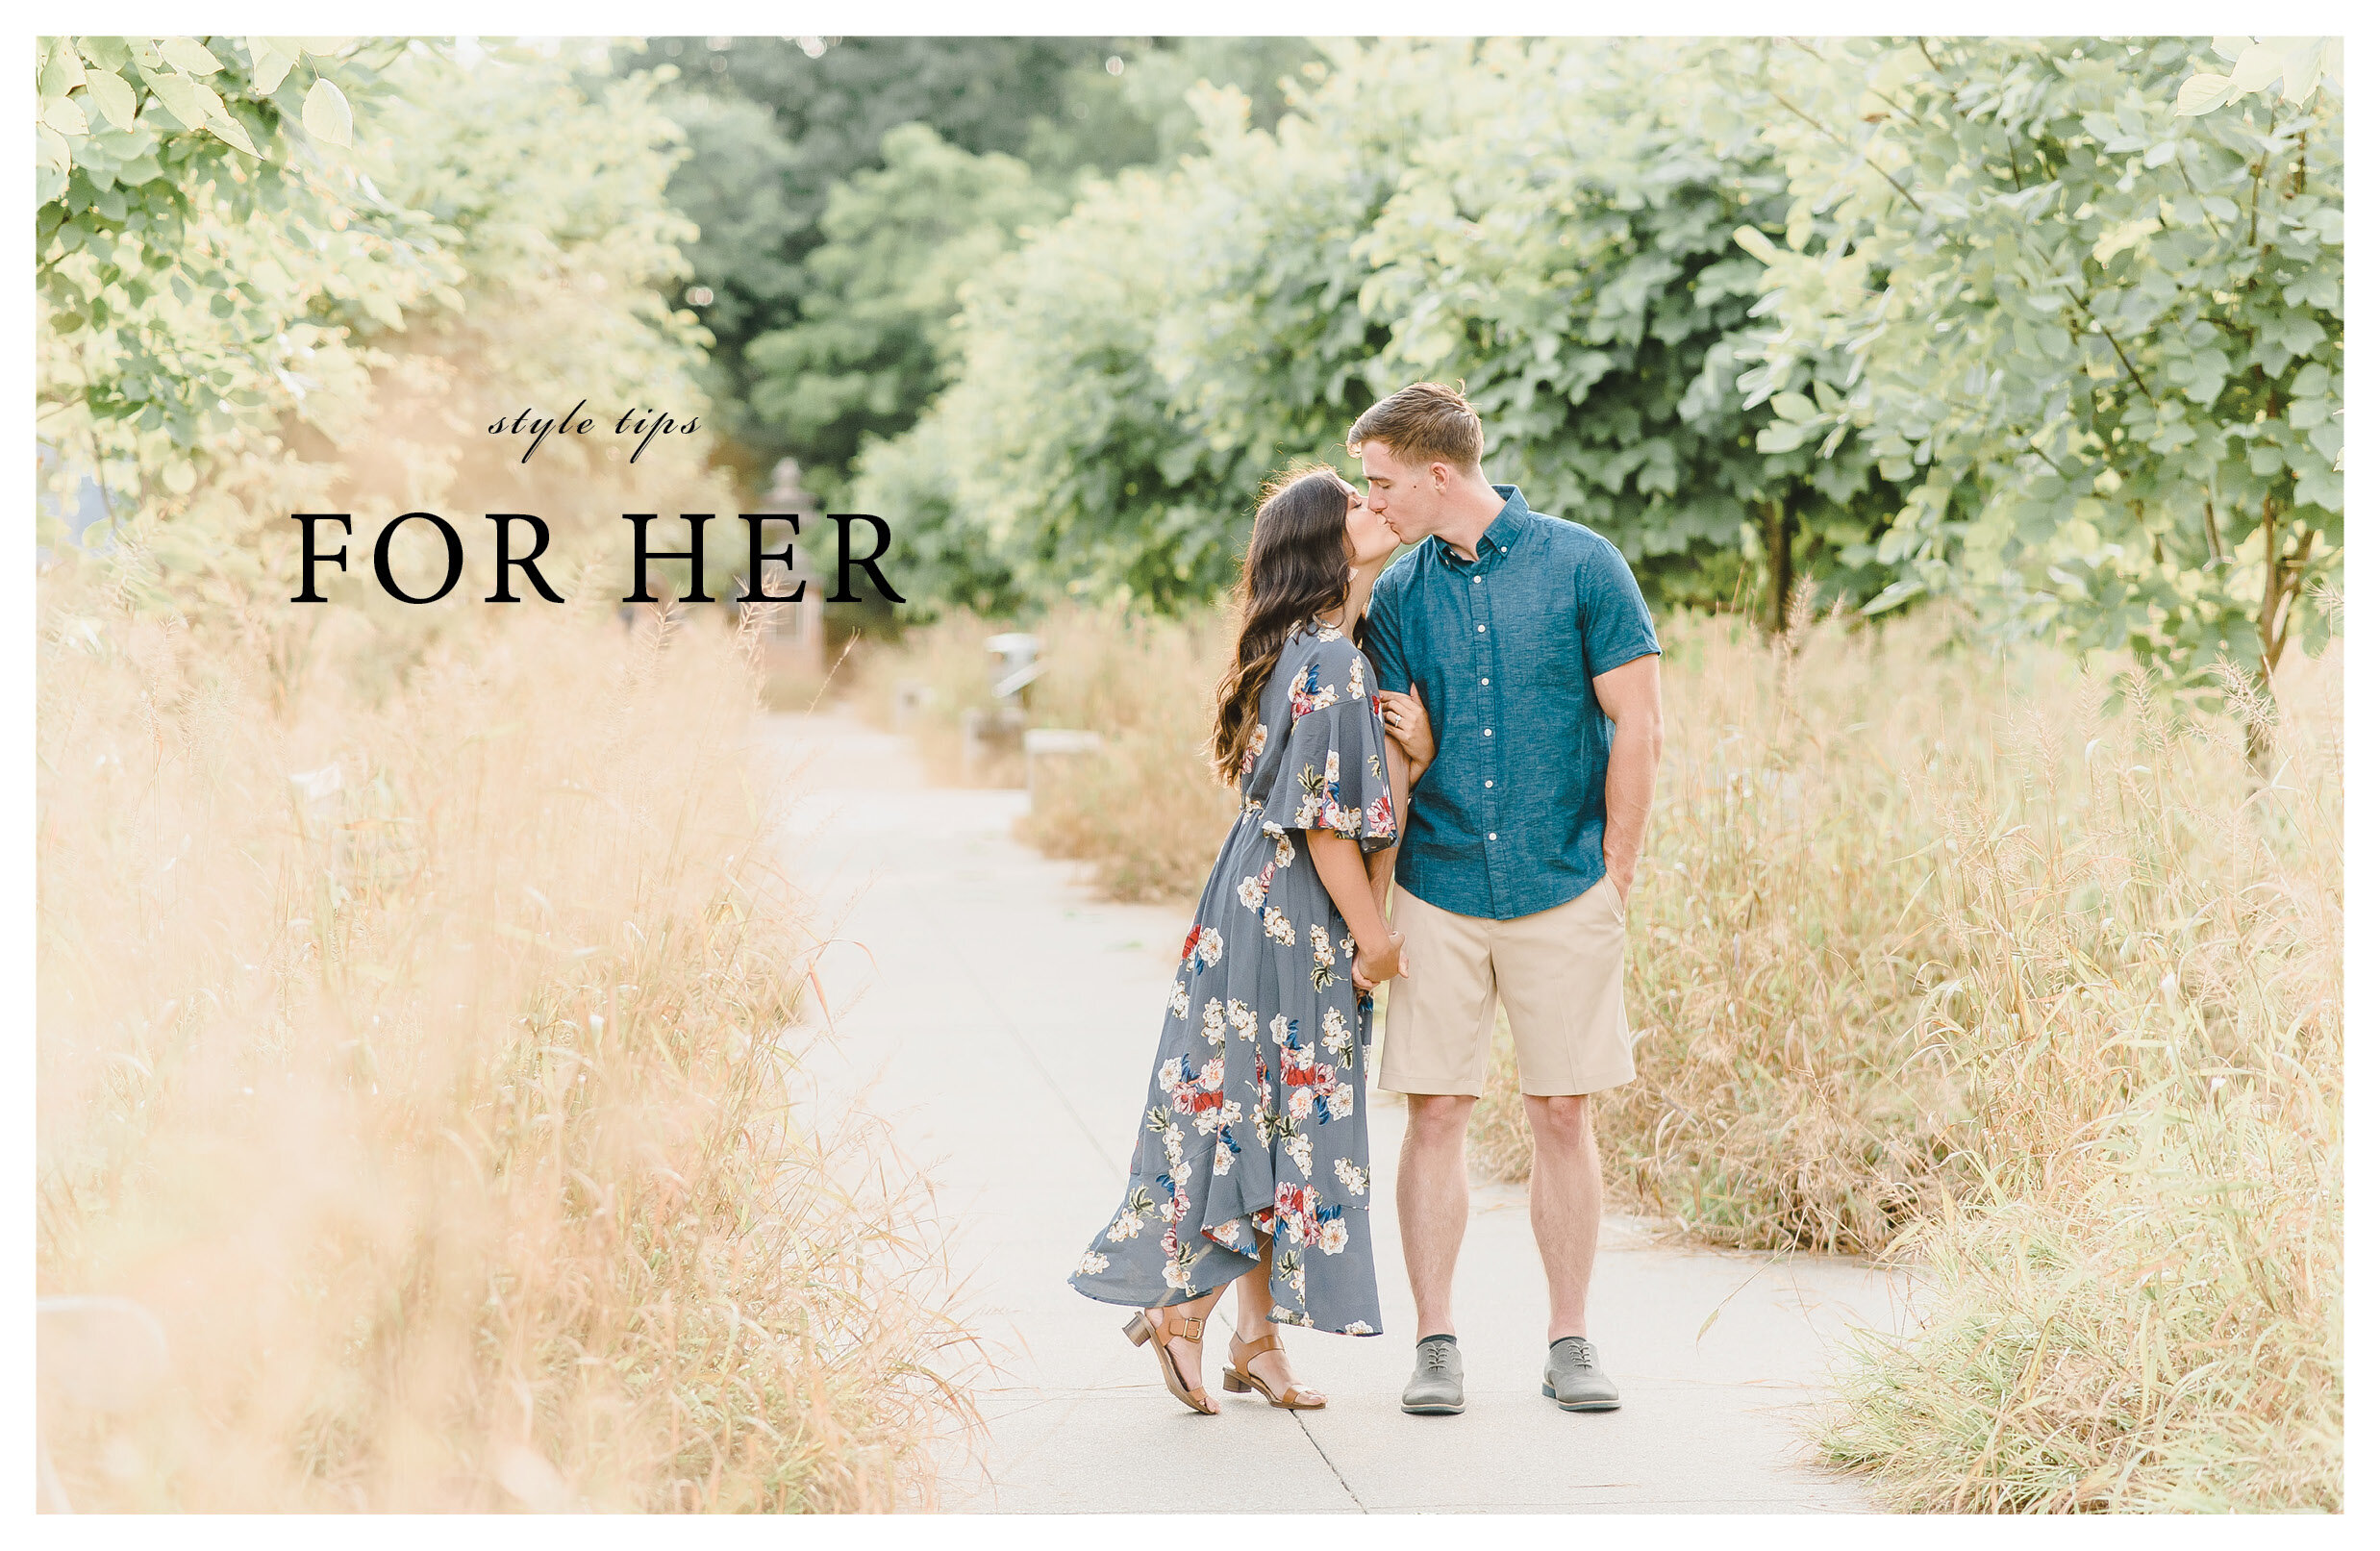 Engagement Session Style Guide7.jpg